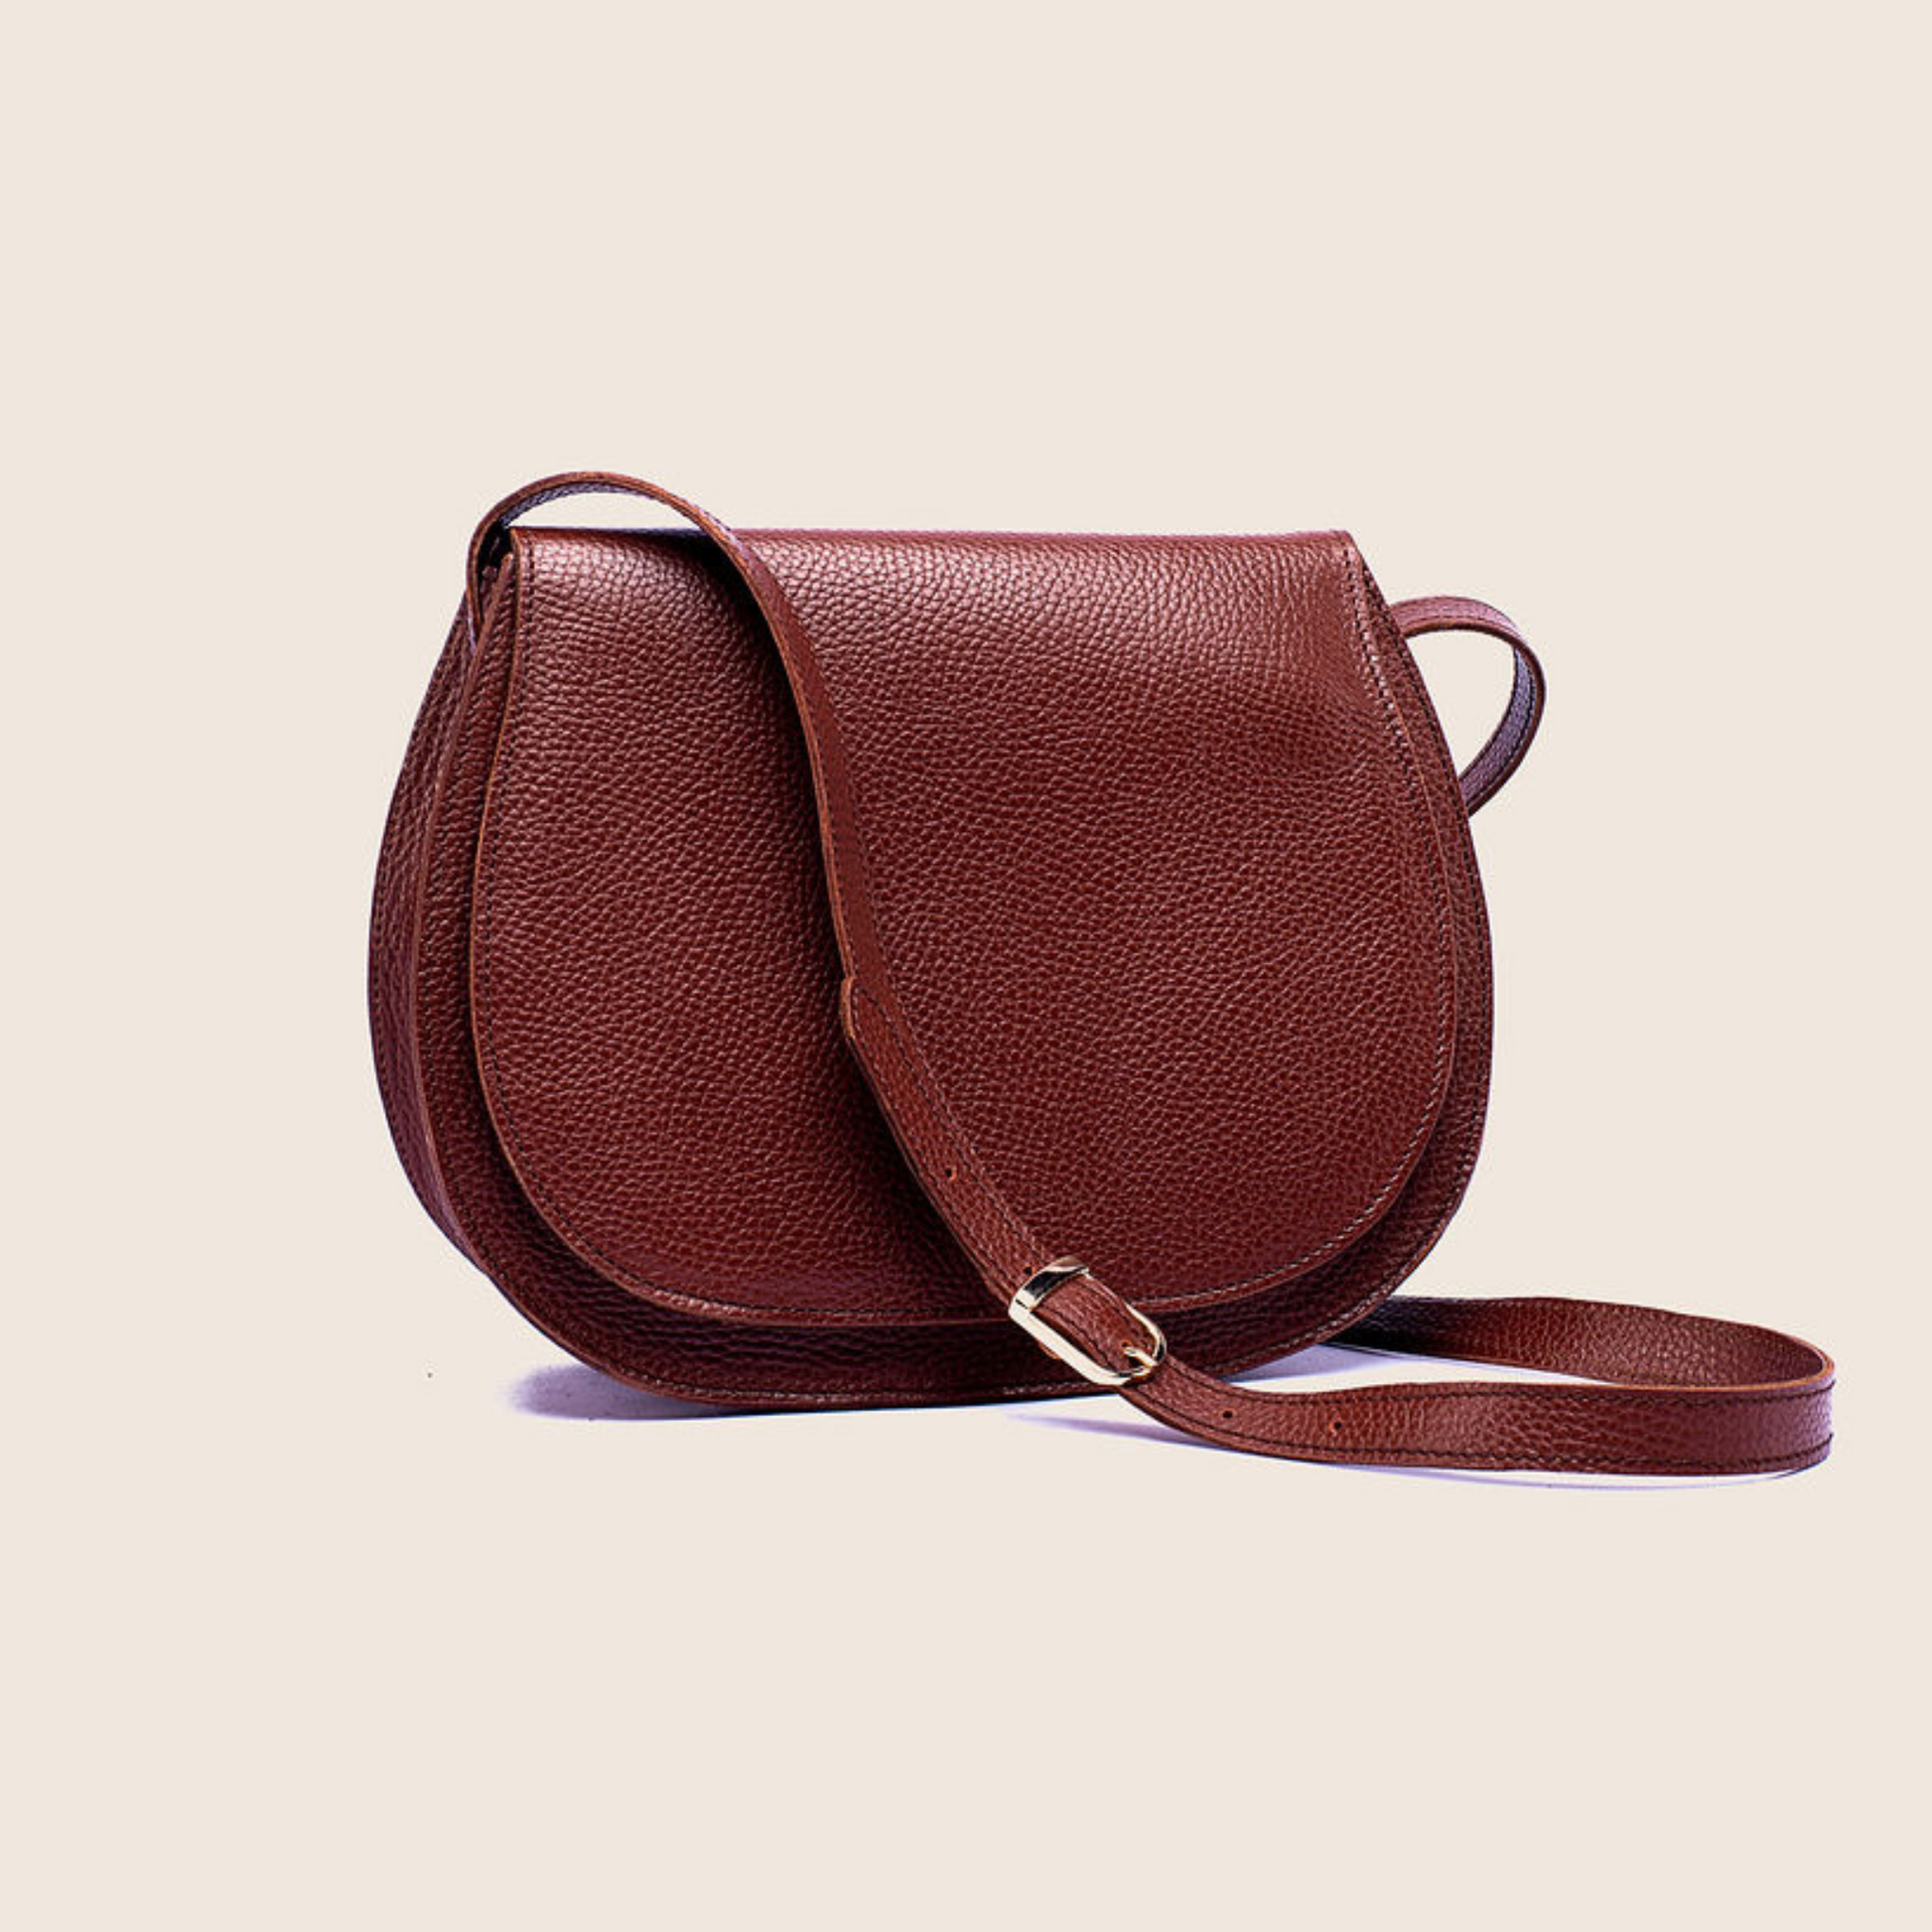 Saddle crossbody in Firebrick milled leather with a crossbody strap